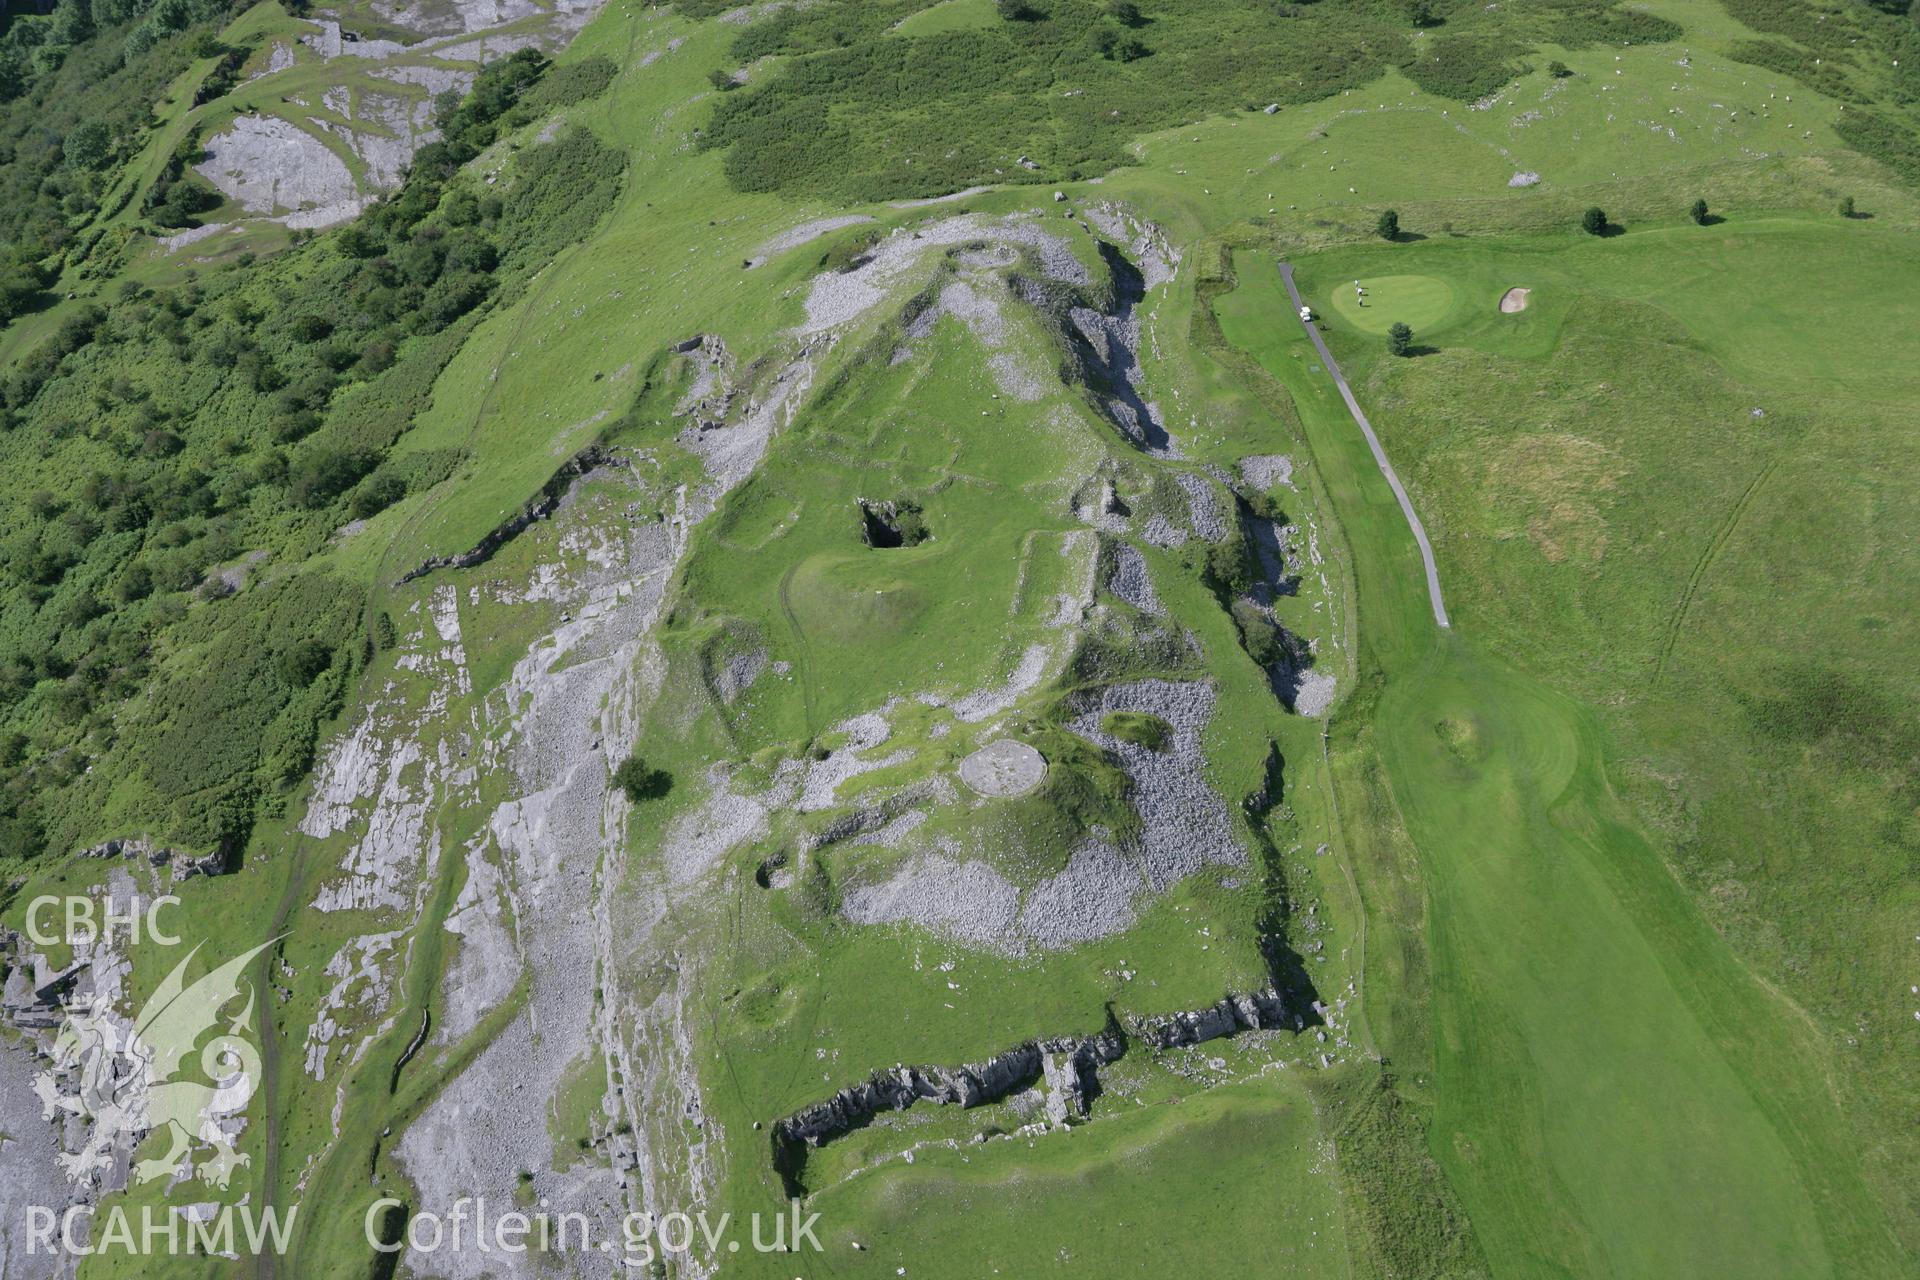 RCAHMW colour oblique aerial photograph of Morlais Castle. Taken on 30 July 2007 by Toby Driver